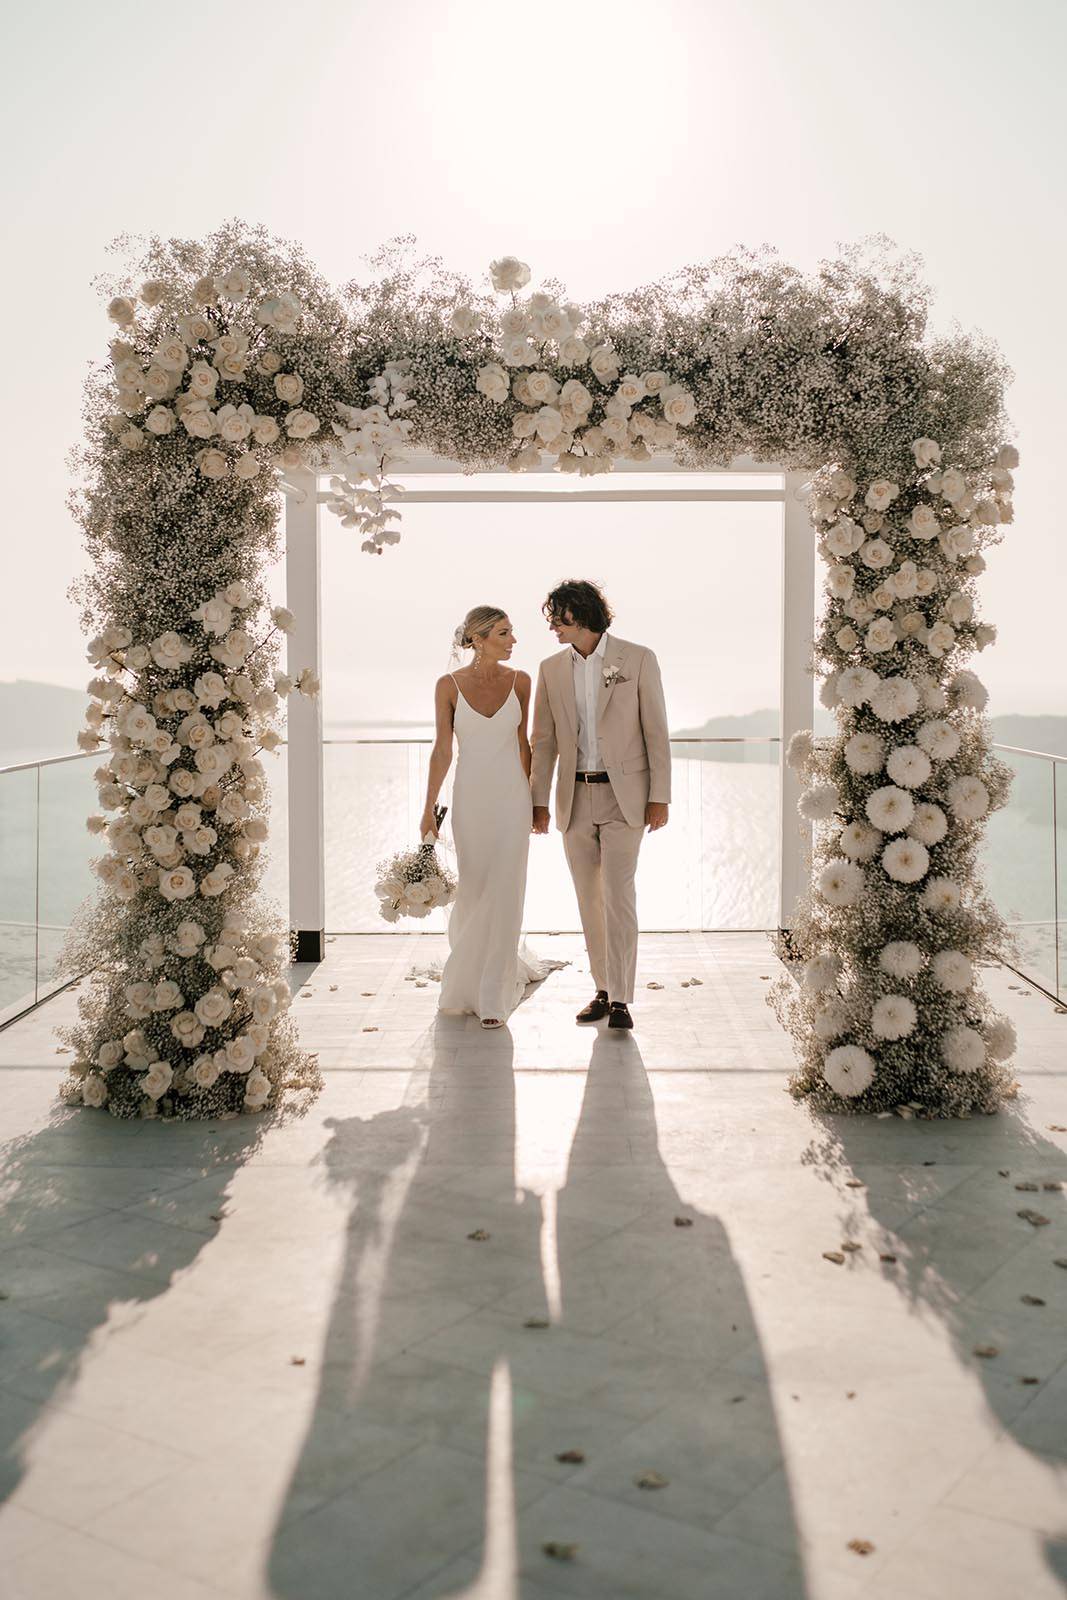 Bride and groom underneath square shaped floral arbor